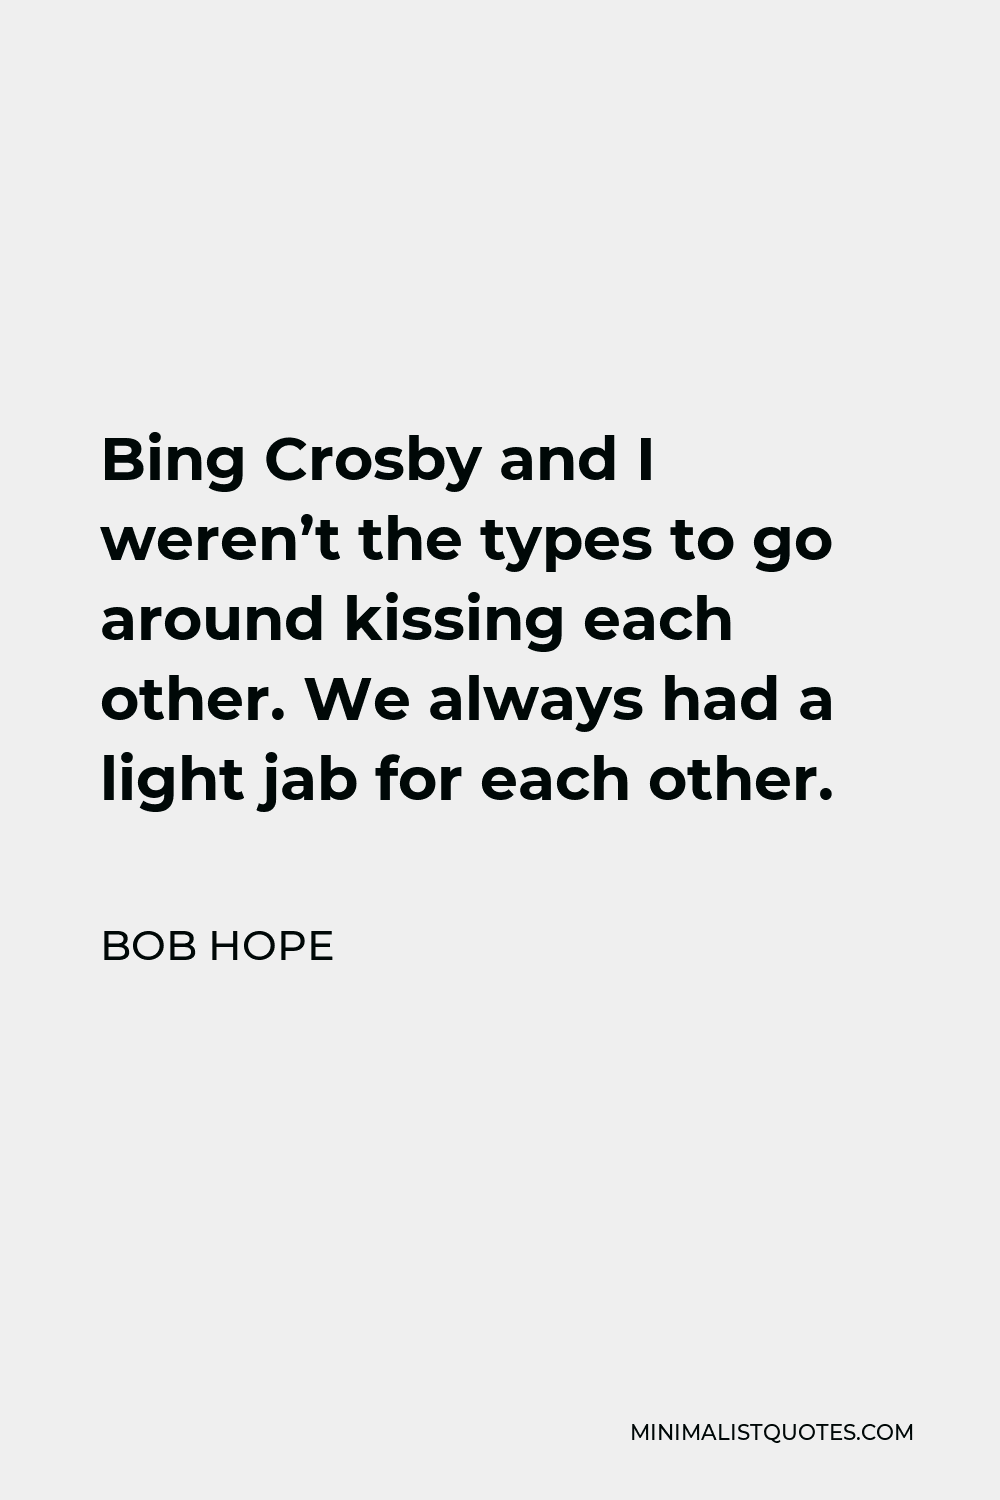 Bob Hope Quote - Bing Crosby and I weren’t the types to go around kissing each other. We always had a light jab for each other.